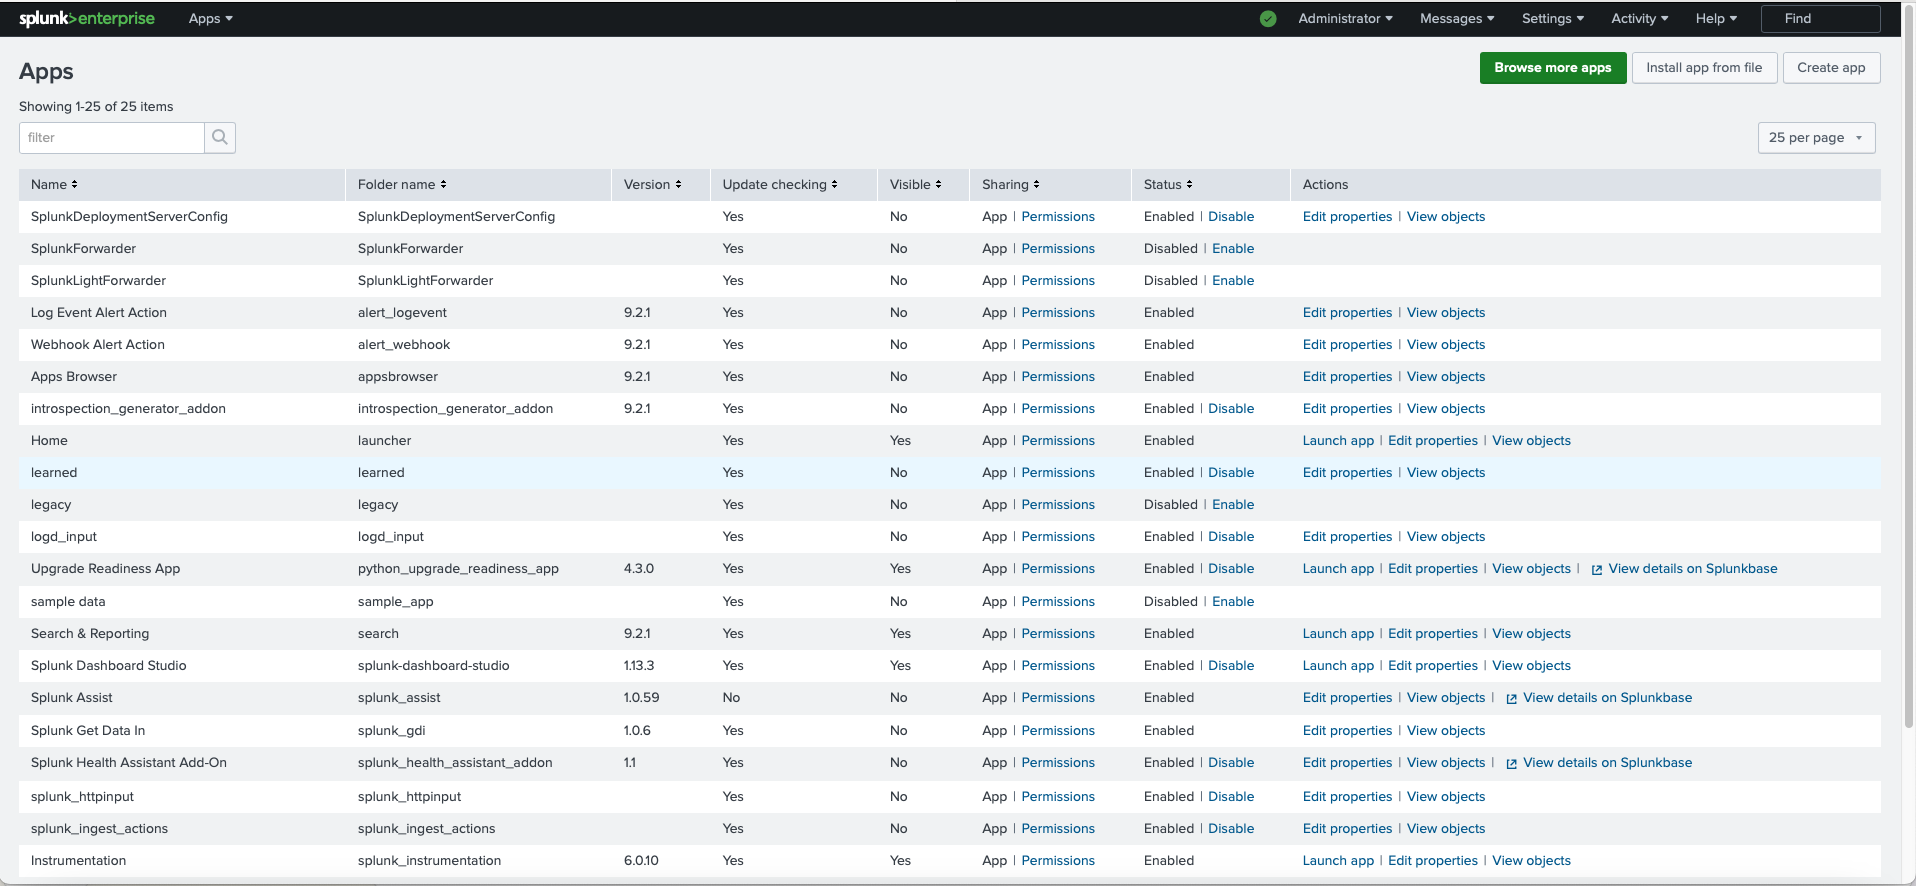 Screenshot of the Splunk Enterprise management console displaying a list of apps with their details and status.